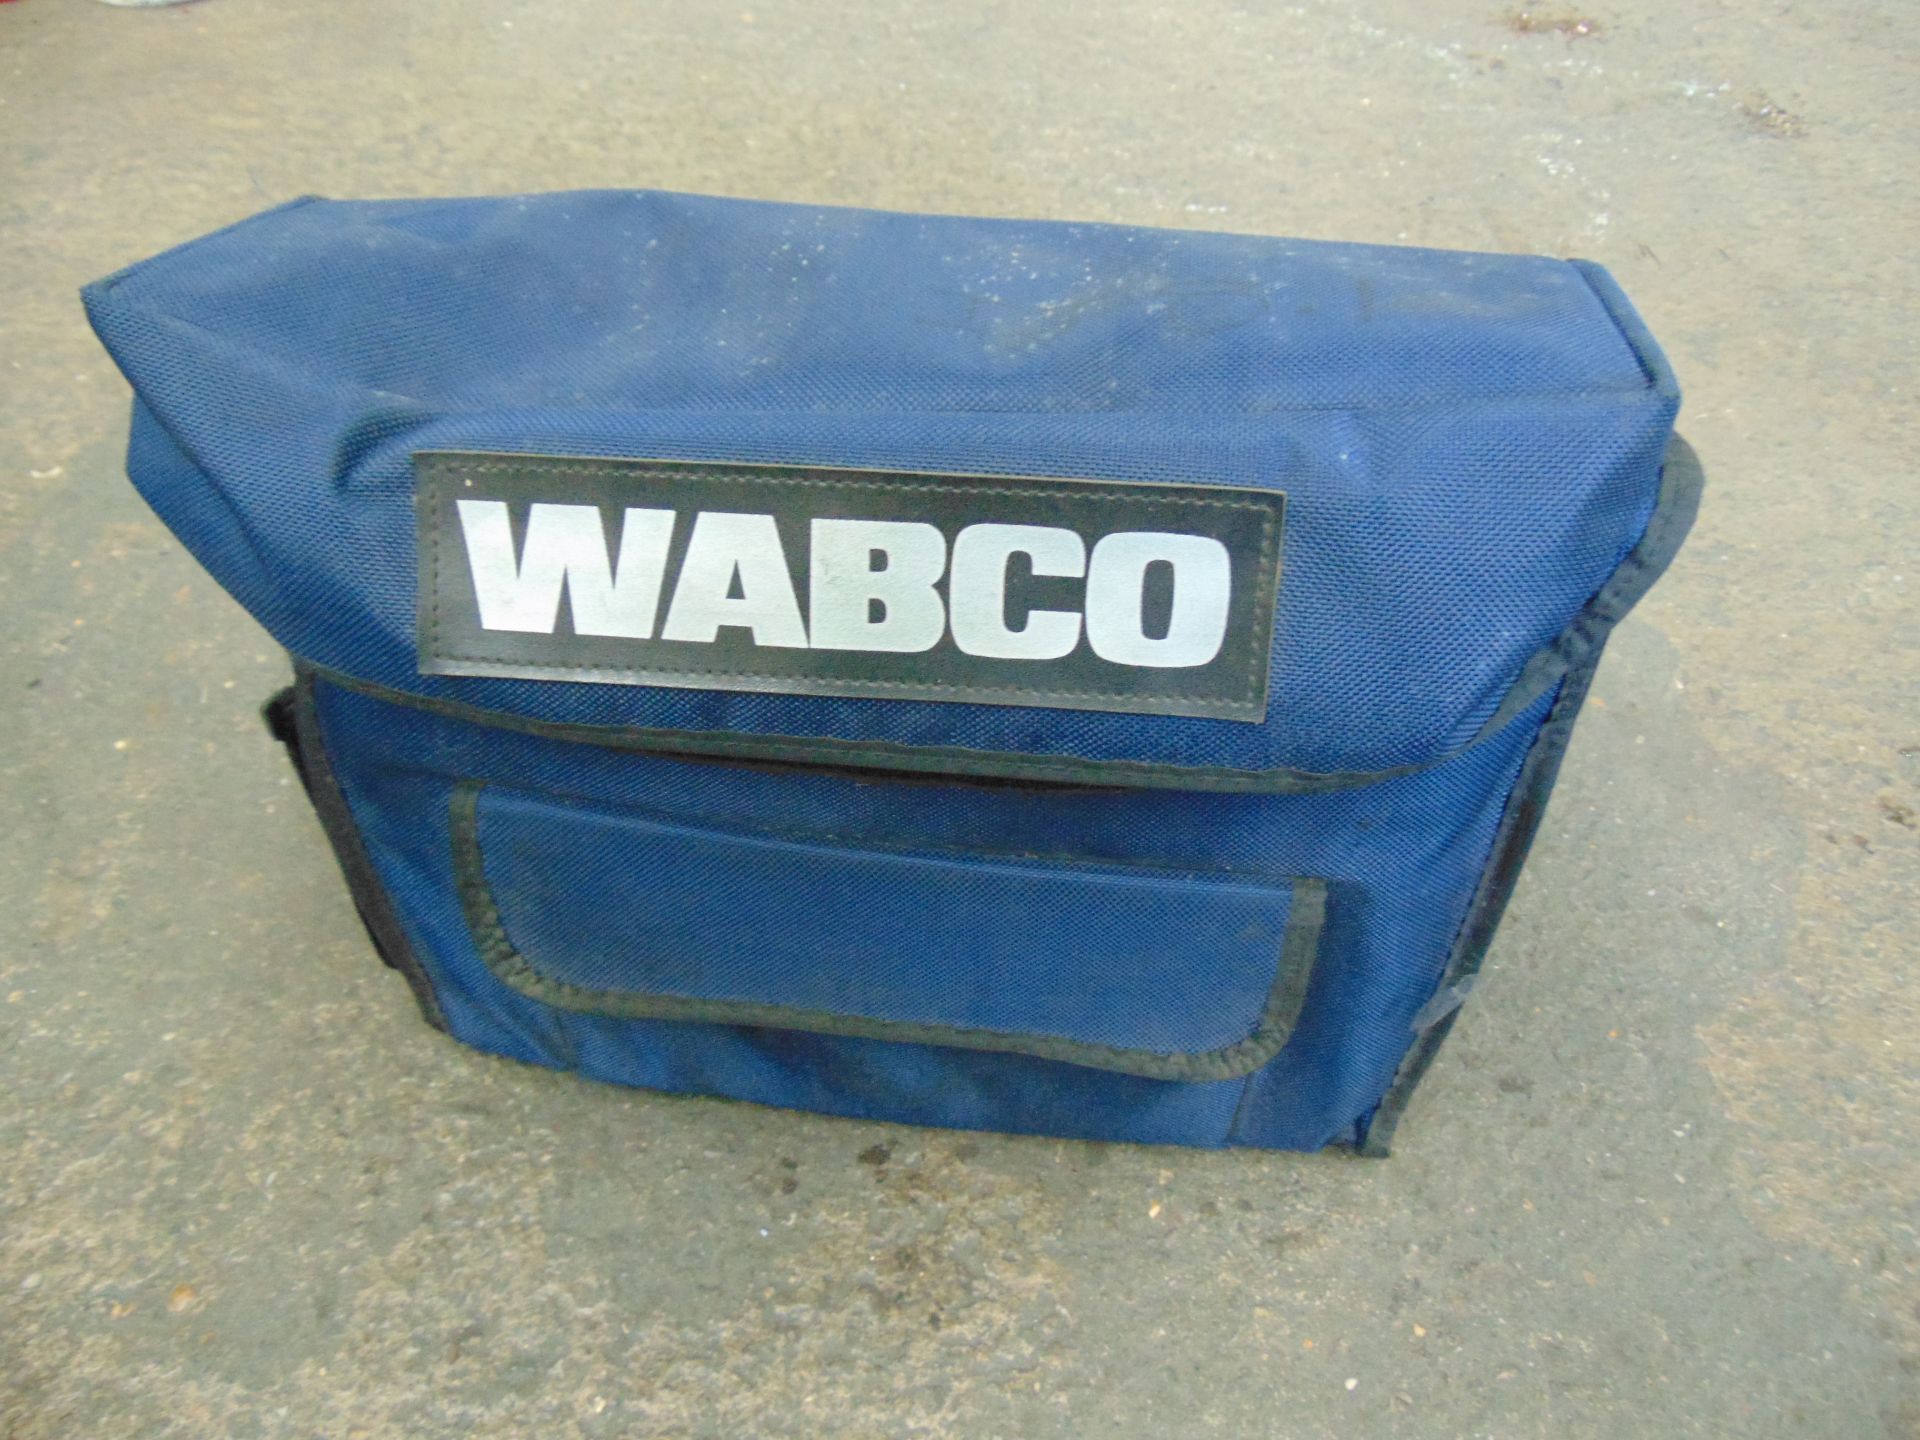 Wabco ABS Diagnostic Kit - Image 15 of 15